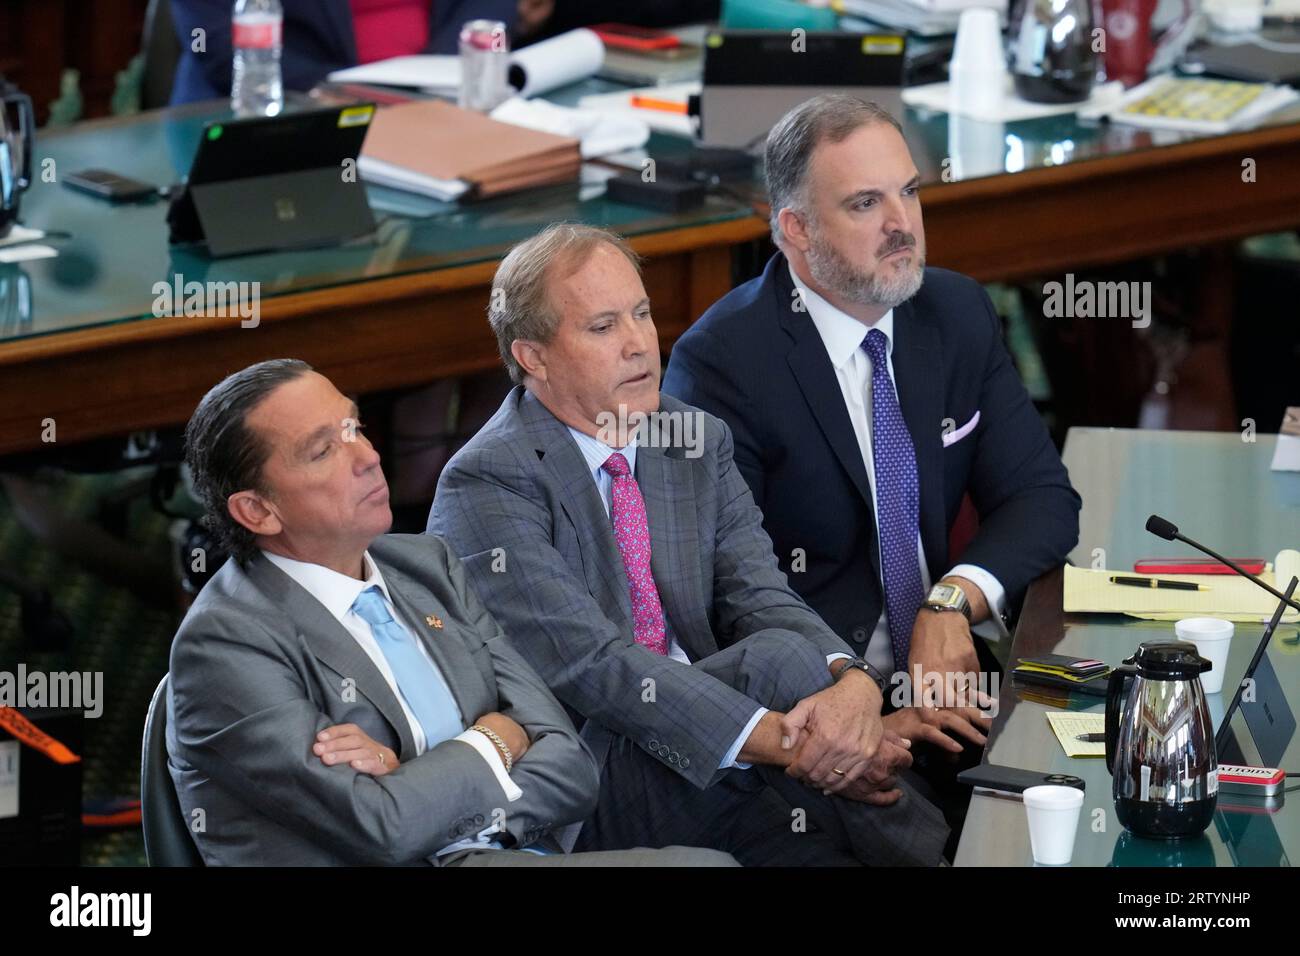 Suspended attorney general KEN PAXTON, c, sits between lawyers TONY BUZBEE, l, and MITCH LITTLE, r, during final arguments in Texas Attorney General Ken Paxton's impeachment trial in the Texas Senate on September 15, 2023. The jury is deliberating the charges late Friday afternoon. Credit: Bob Daemmrich/Alamy Live News Stock Photo